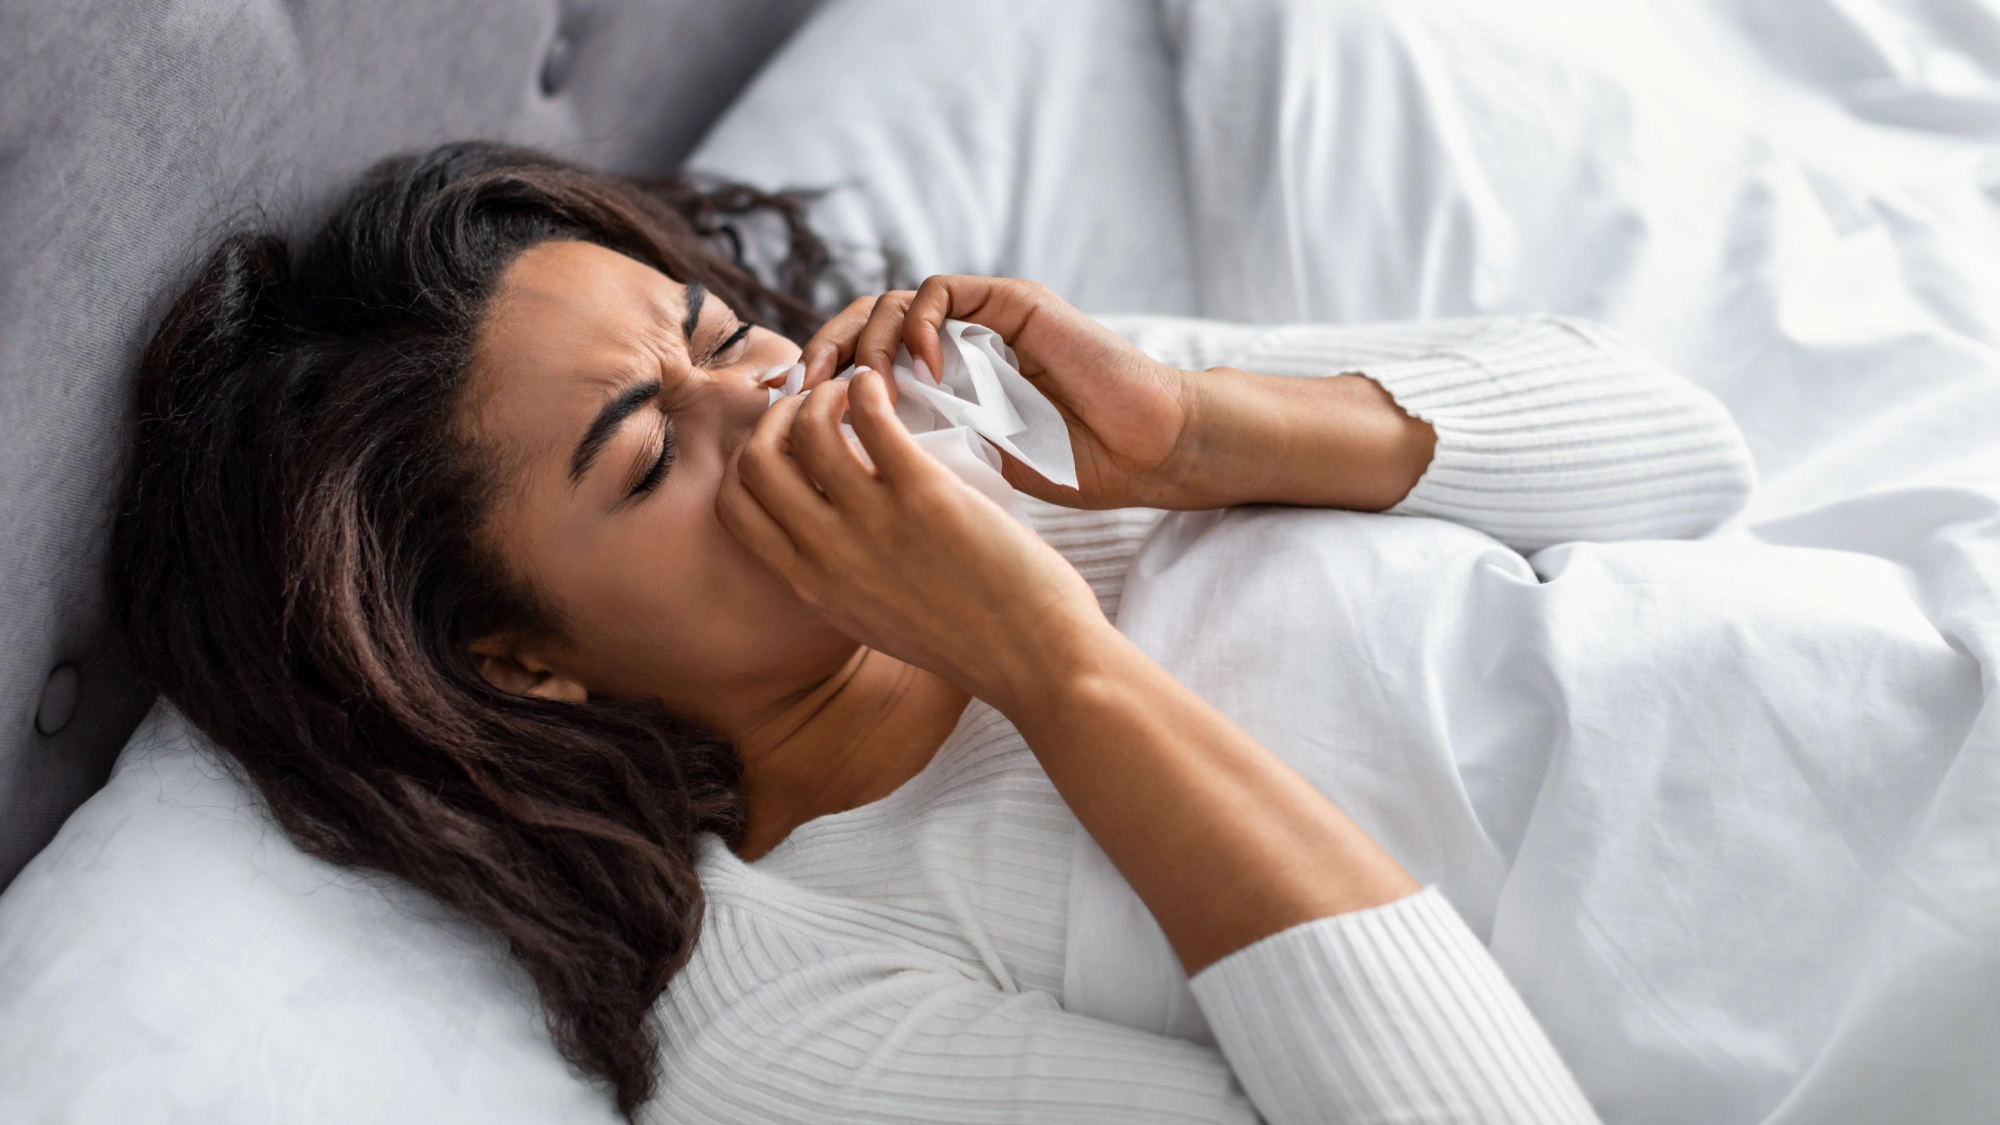 Black woman laying bed sick while blowing her nose